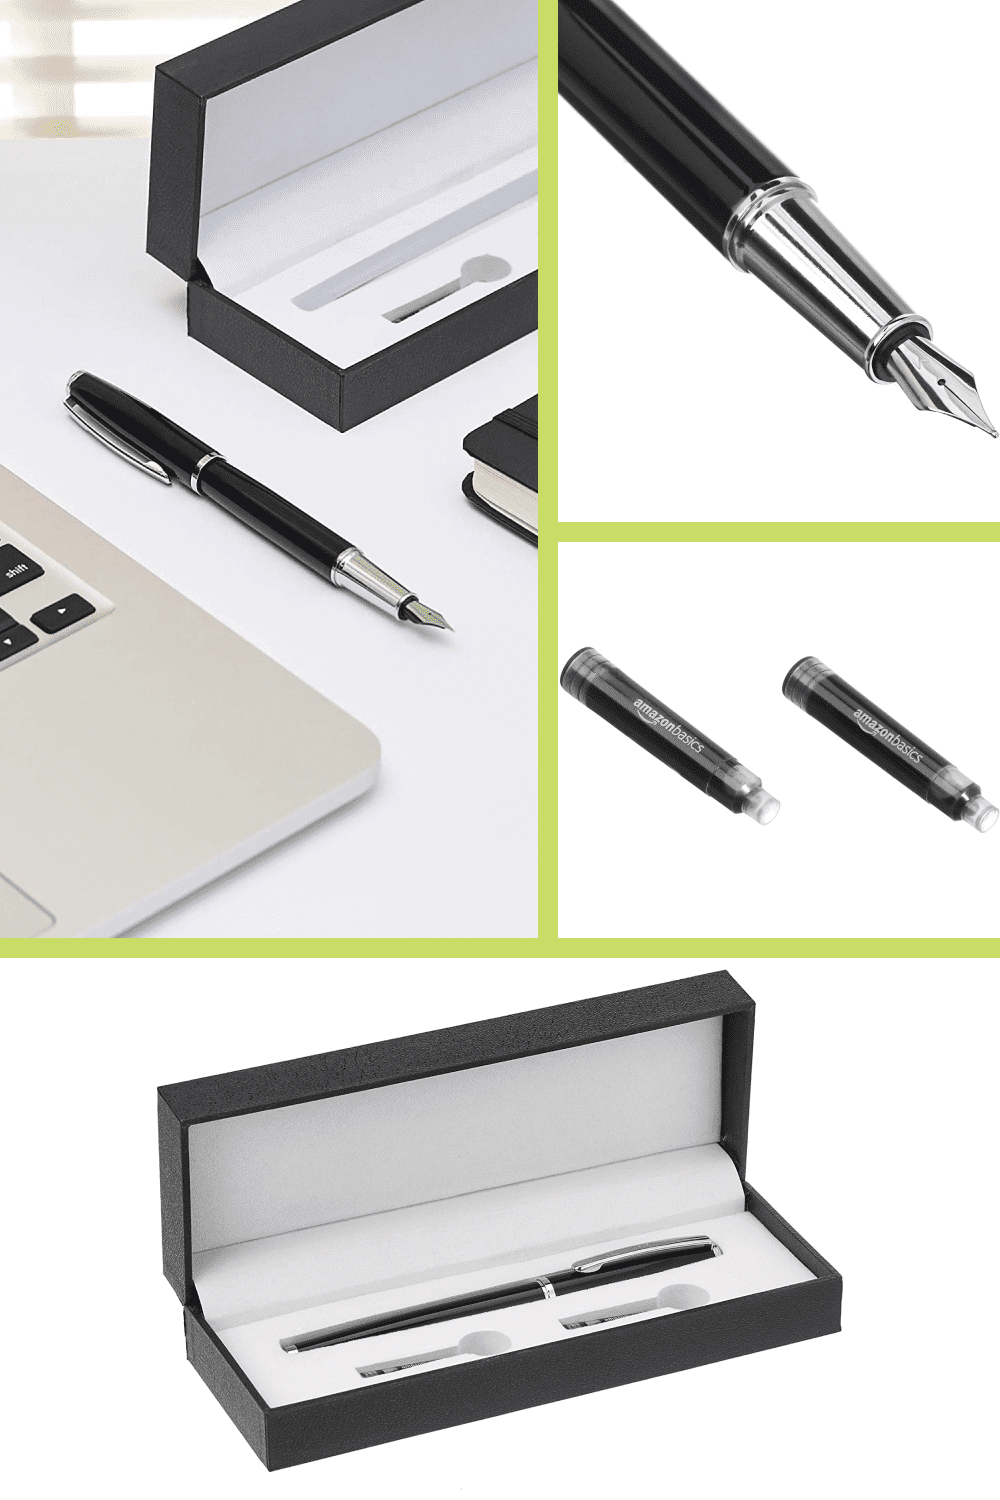 Refillable fountain pen combines a premium feel with smooth results for a luxurious writing experience.